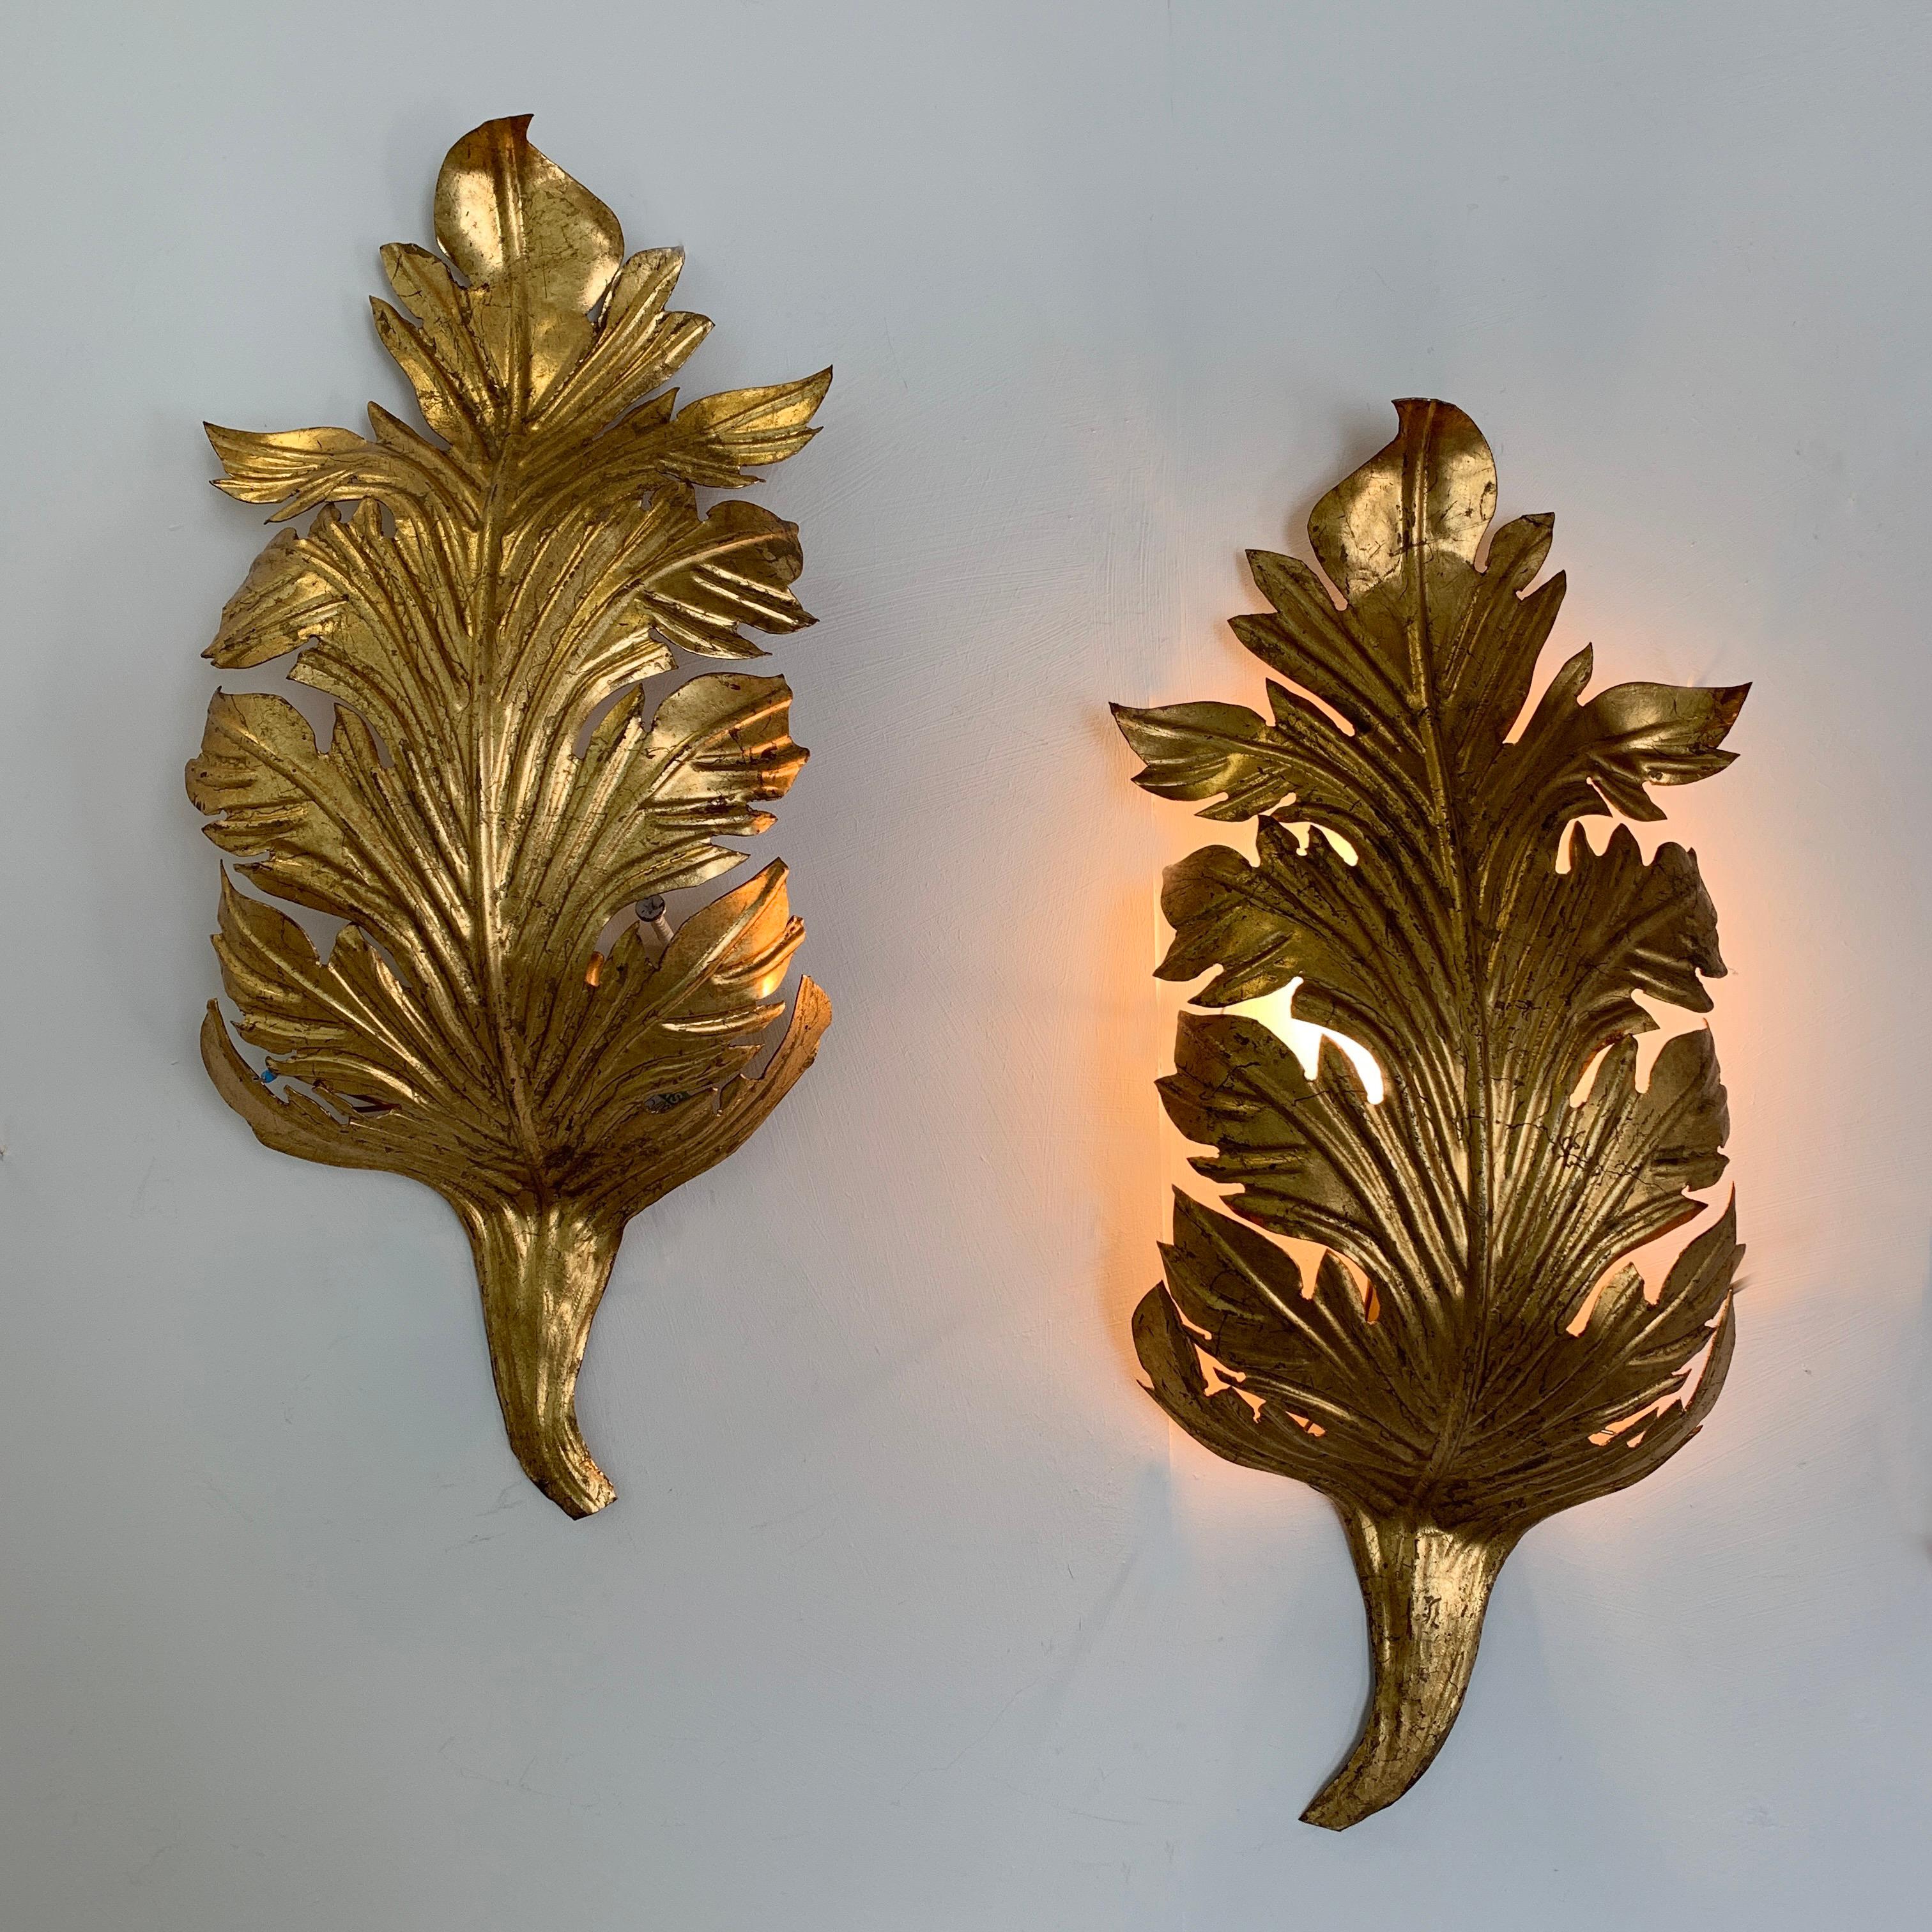 Gold acanthus leaf wall lights, circa 1960s
Beautiful handcrafted acanthus leaf shaped lights
French/Italian origin
Measures: 45cm height, 20cm width, 8cm depth
Pat Tested
Price is for the pair, 2 lights. 1 pair available
We have just lit one